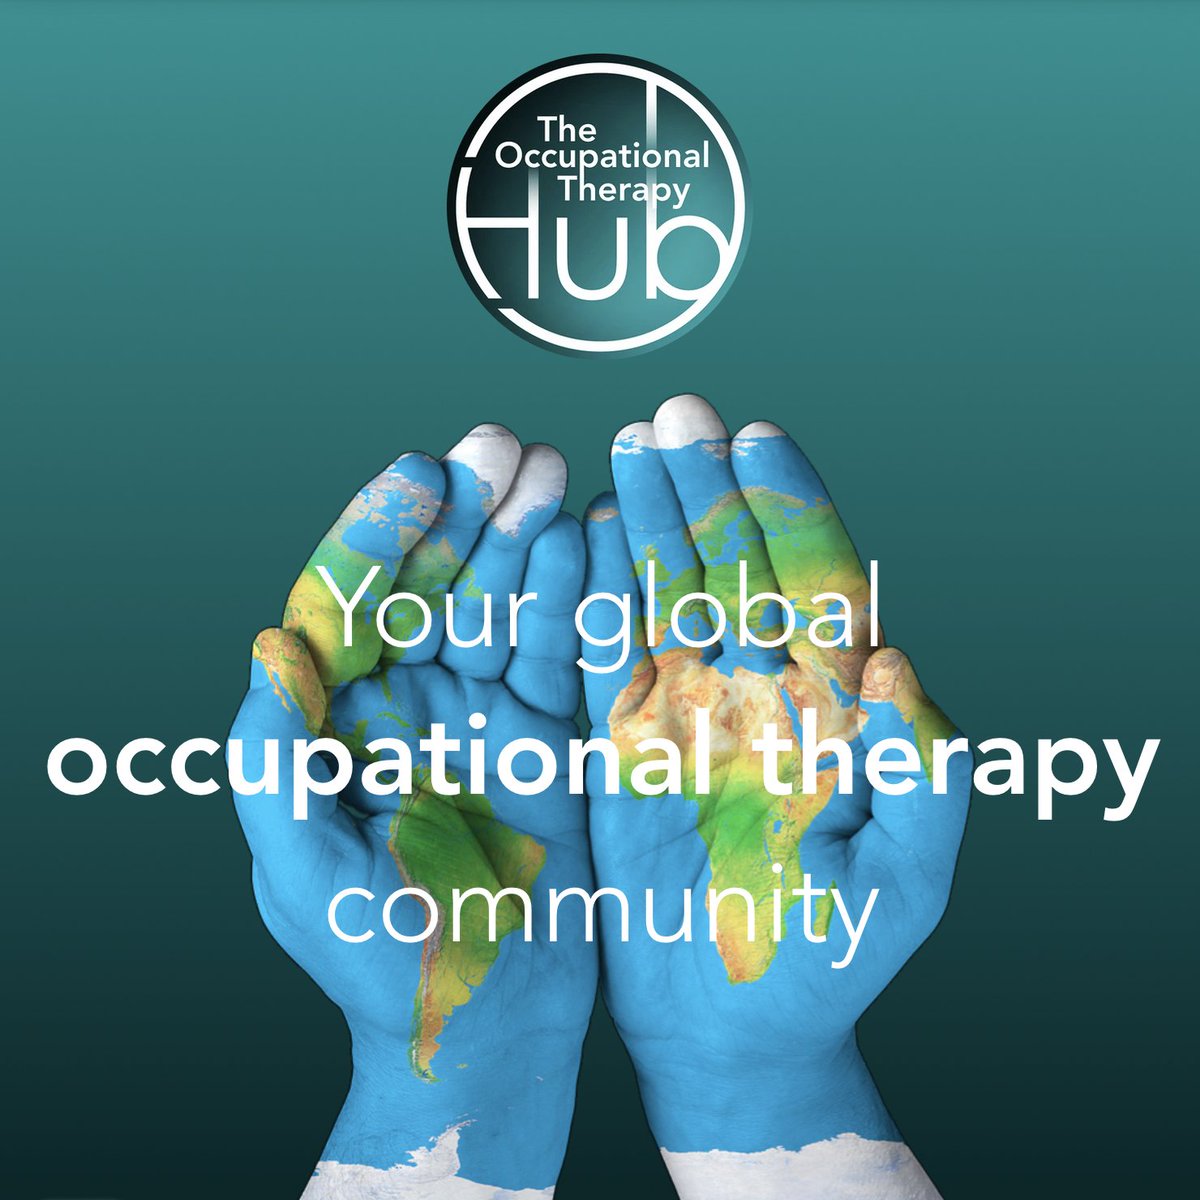 ☄️ We passionately empower clinicians, students and those they support. Via global connections, education and continuing professional development (#CPD) resources. Learn about our inclusive community platform and app: theOThub.com/mission #OccupationalTherapy